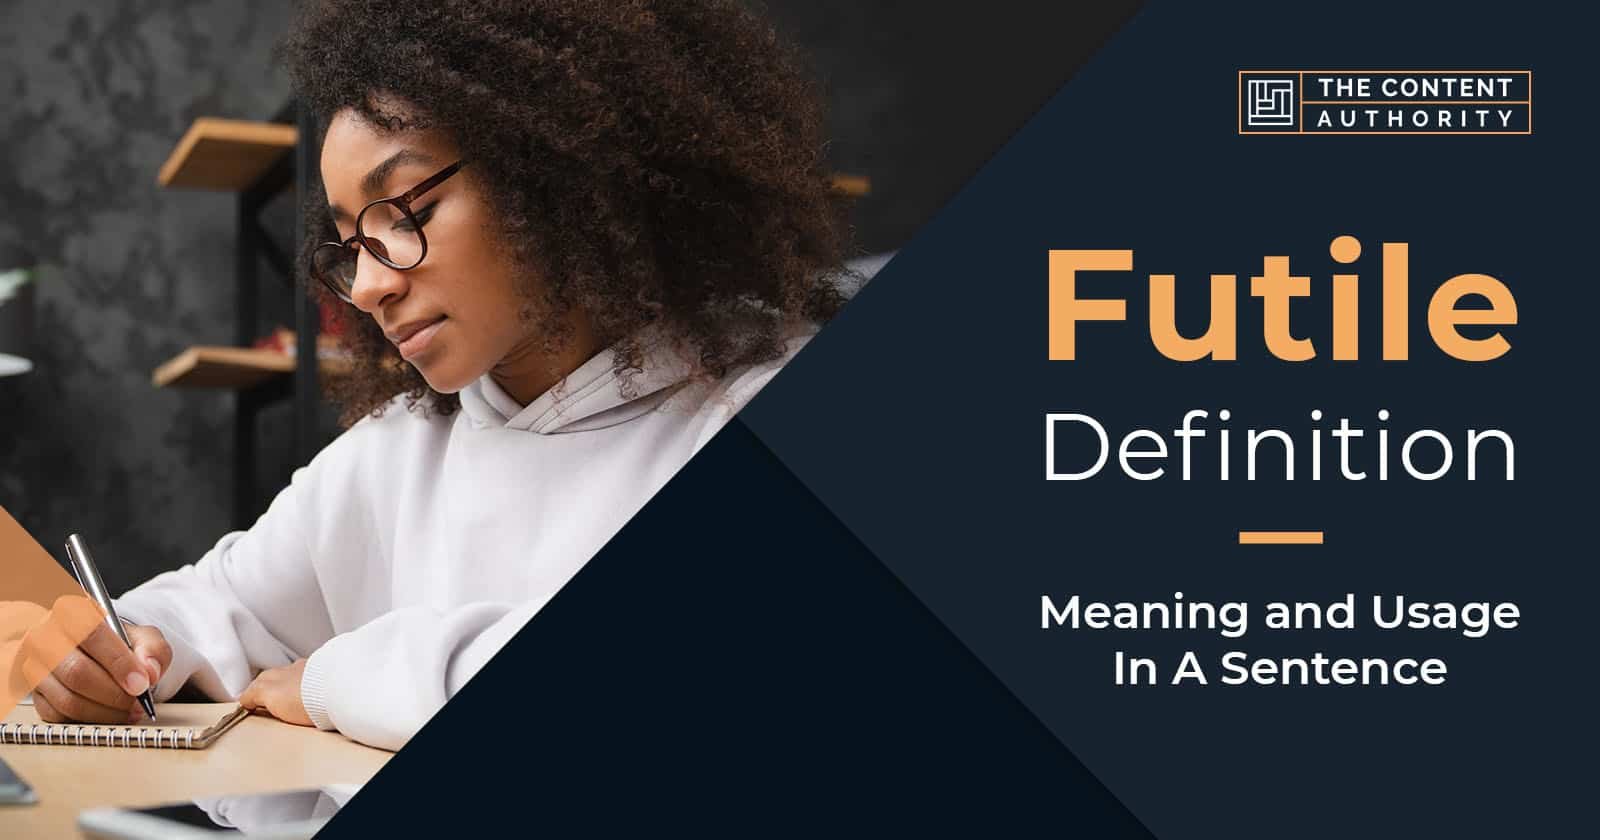 Futile Definition &#8211; Meaning and Usage in a Sentence